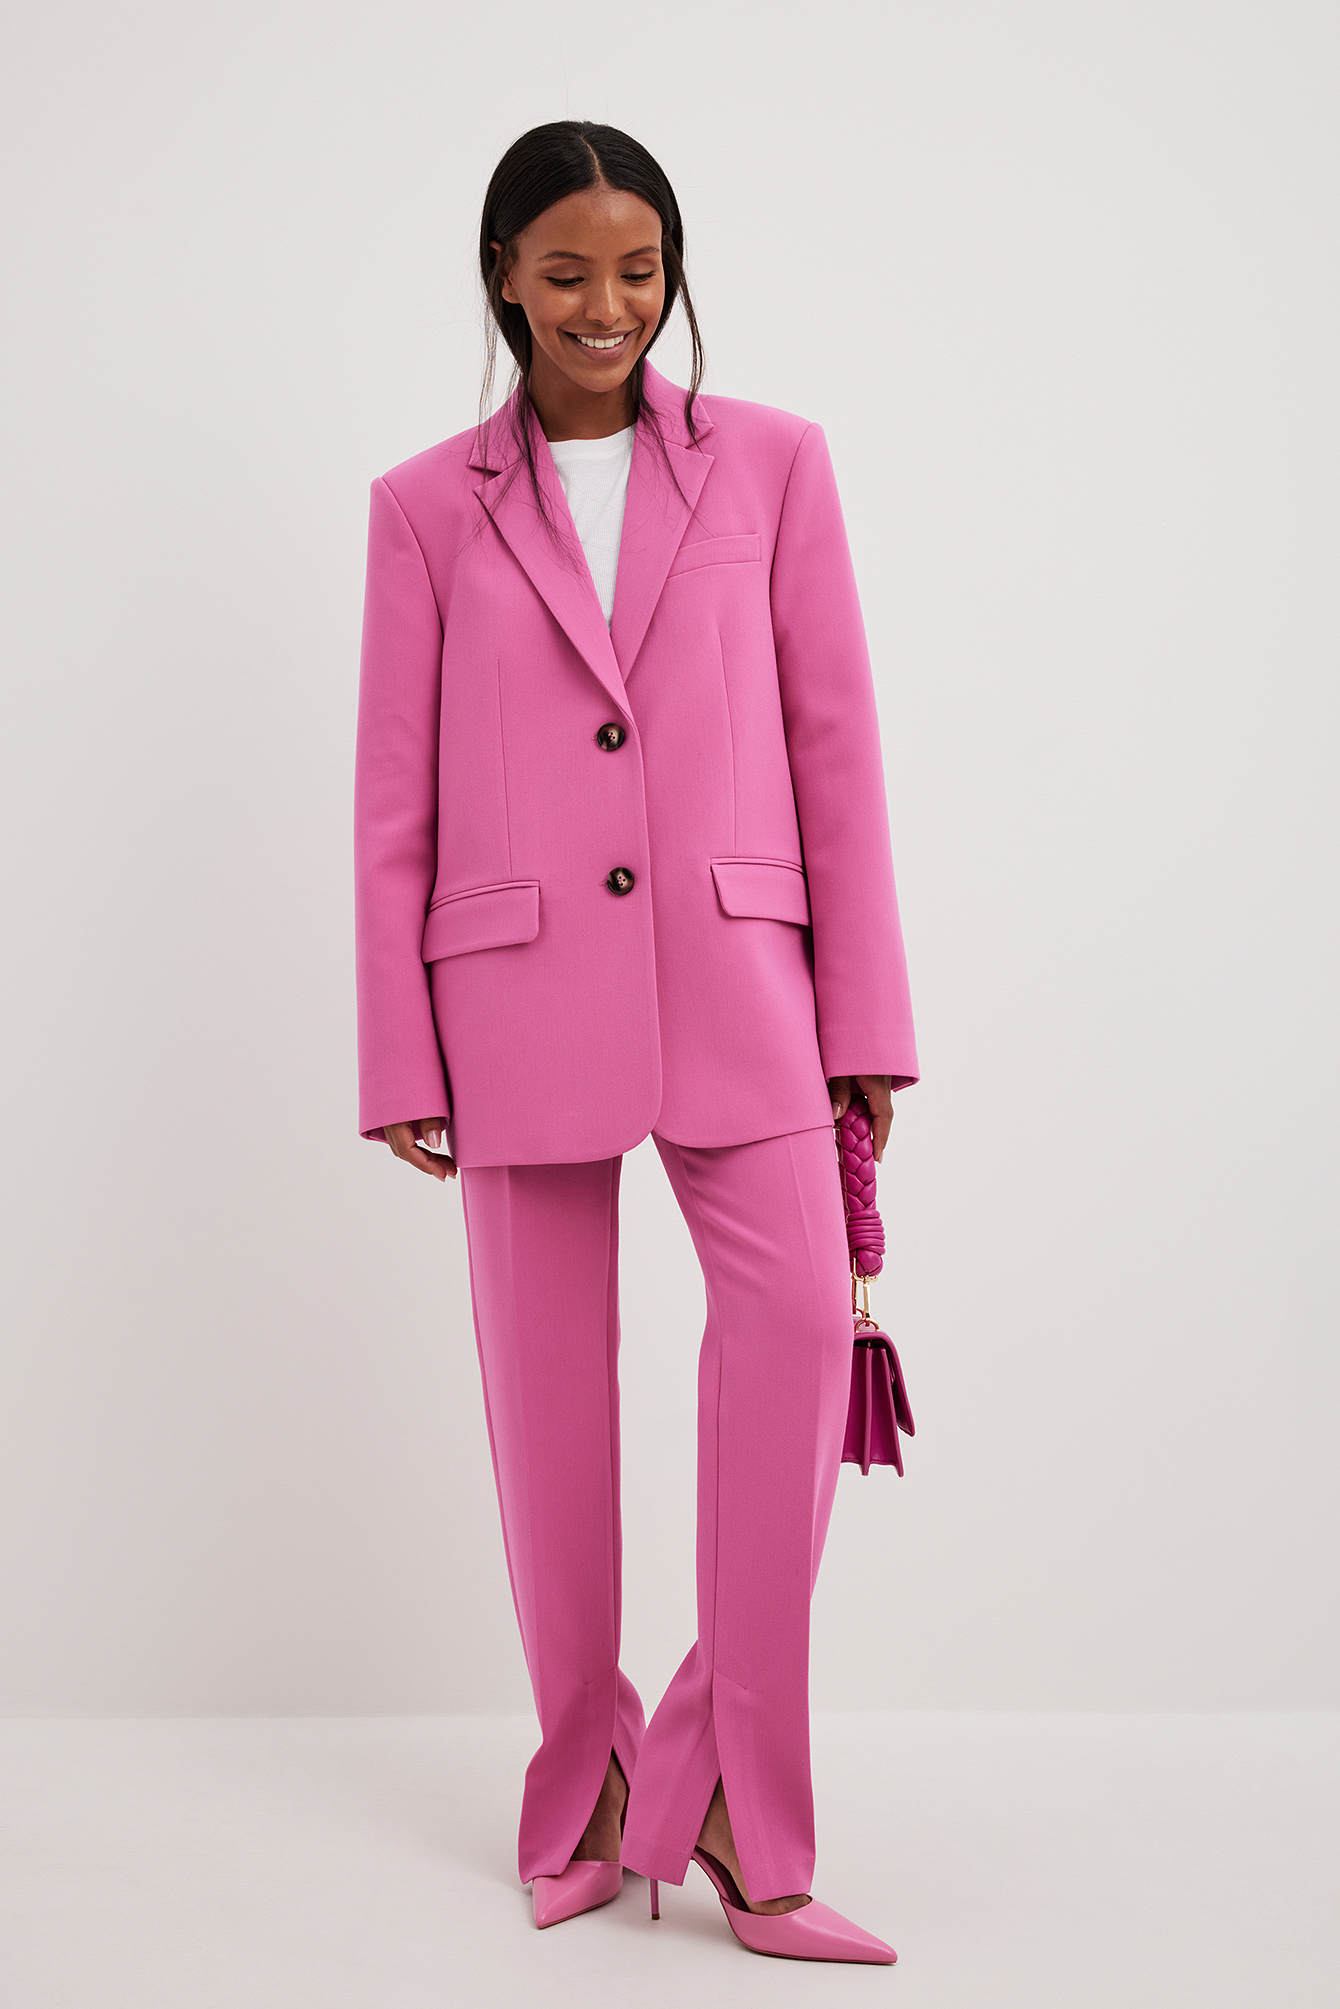 Hot Pink 3-piece Pantsuit for Women, Pink Blazer Trouser Suit for Women  With Bralette Top, Relaxed Fit Blazer and High Waist Pants -  Finland